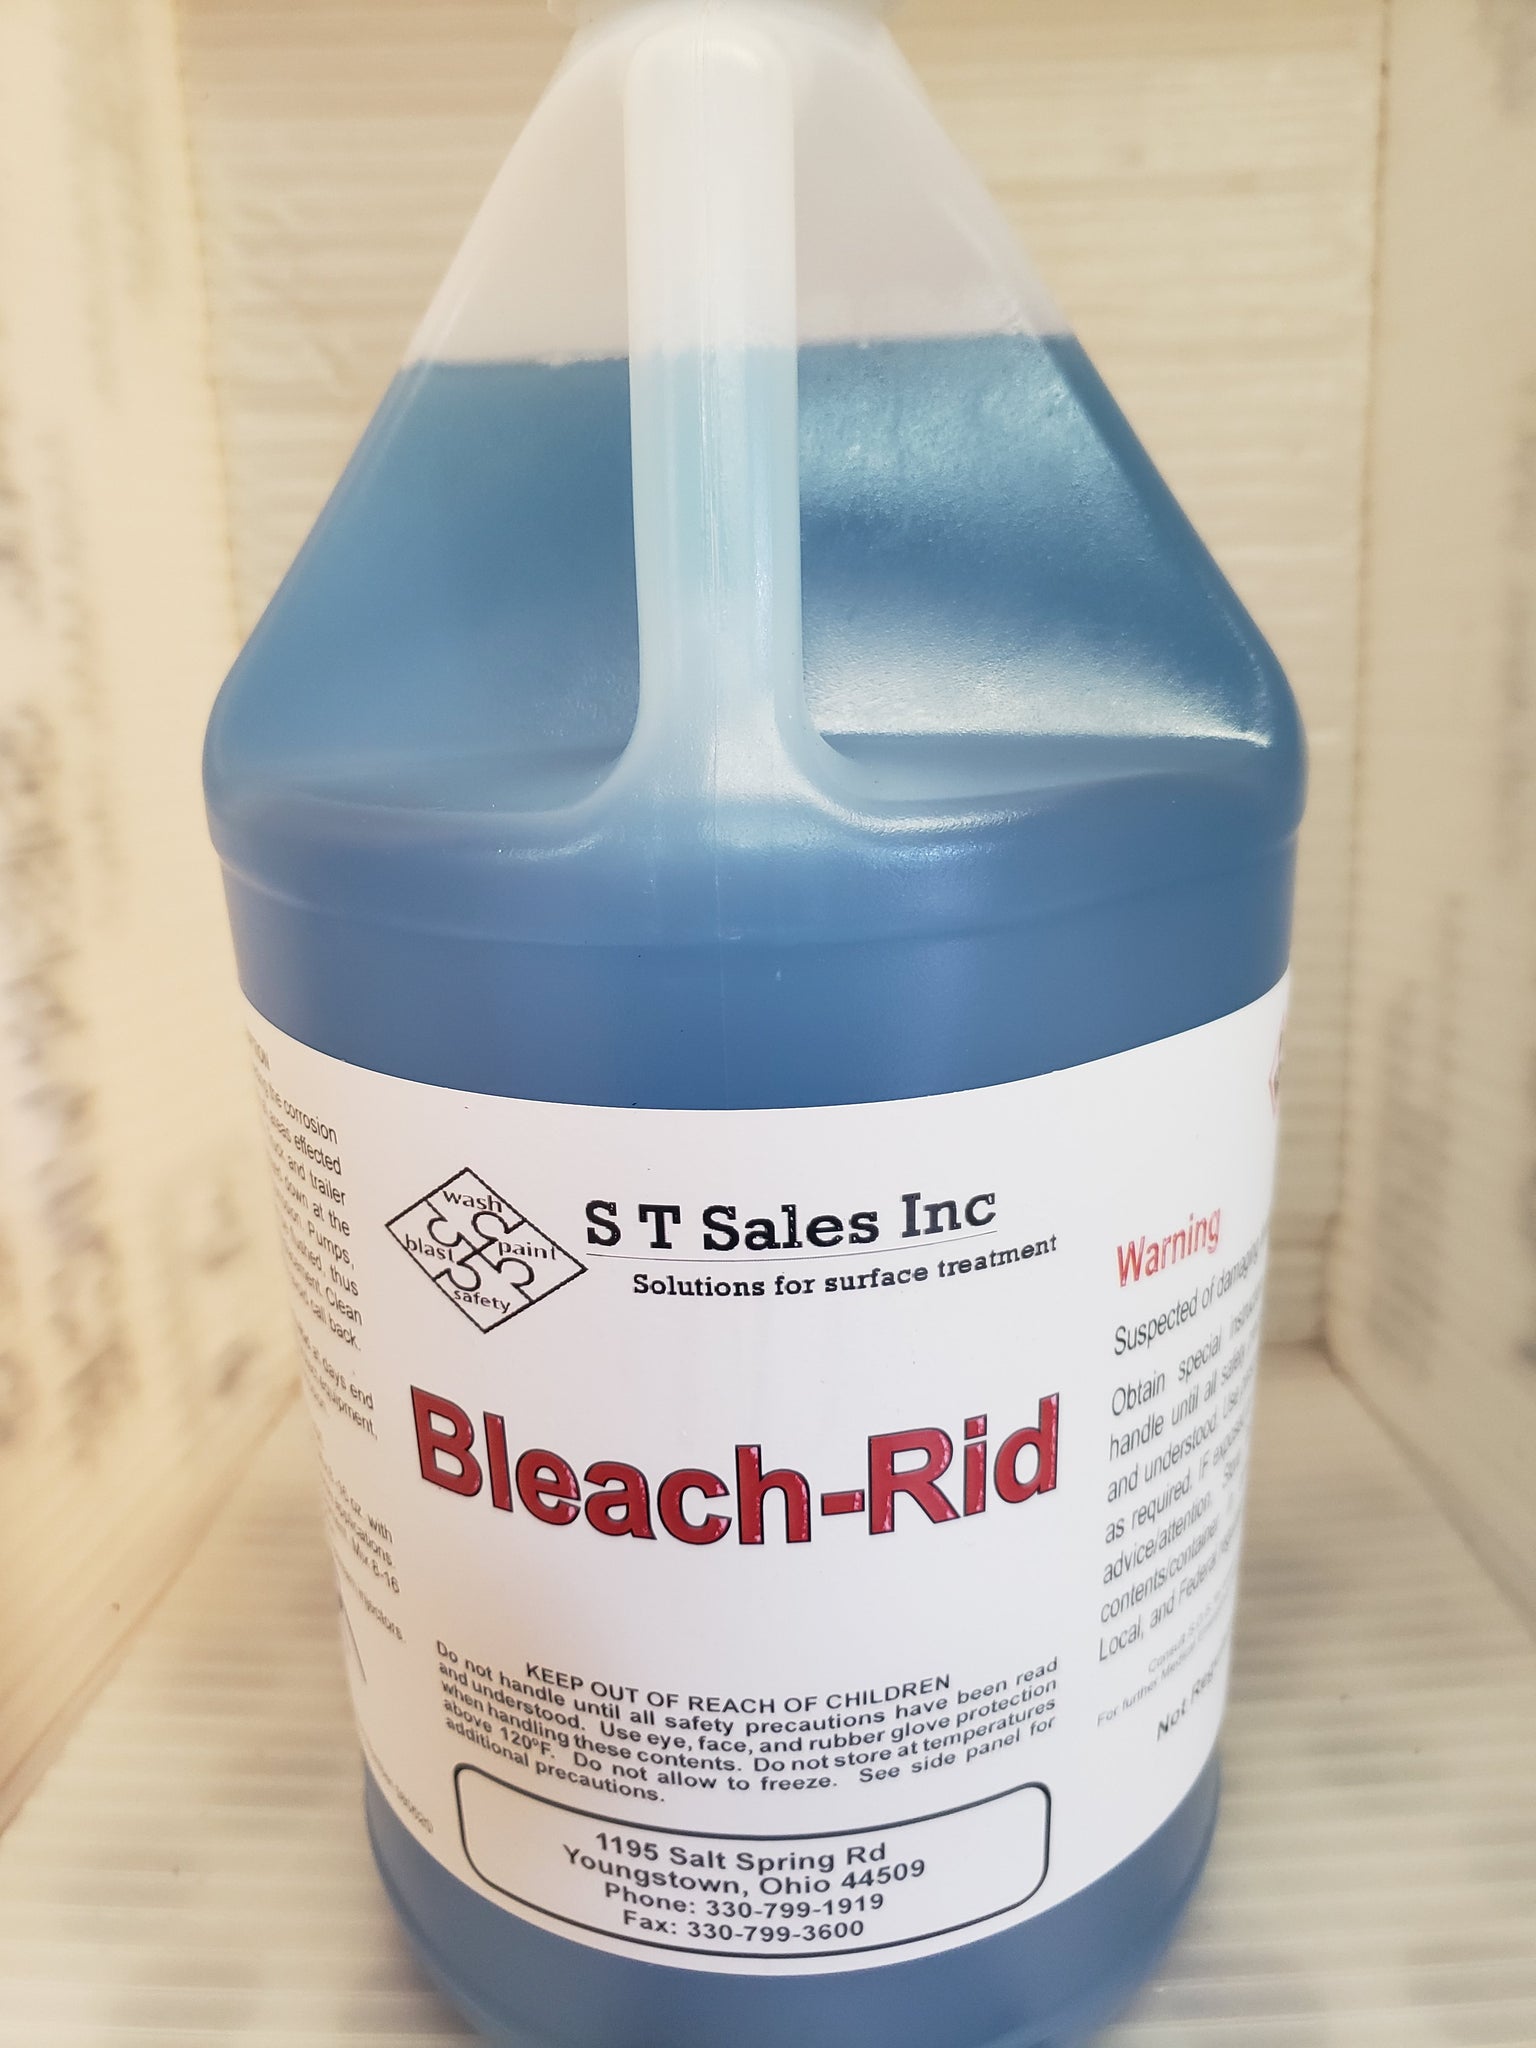 Bleach-Rid After Wash Rinse Neutralize Bleach Crystals to Prevent Corr